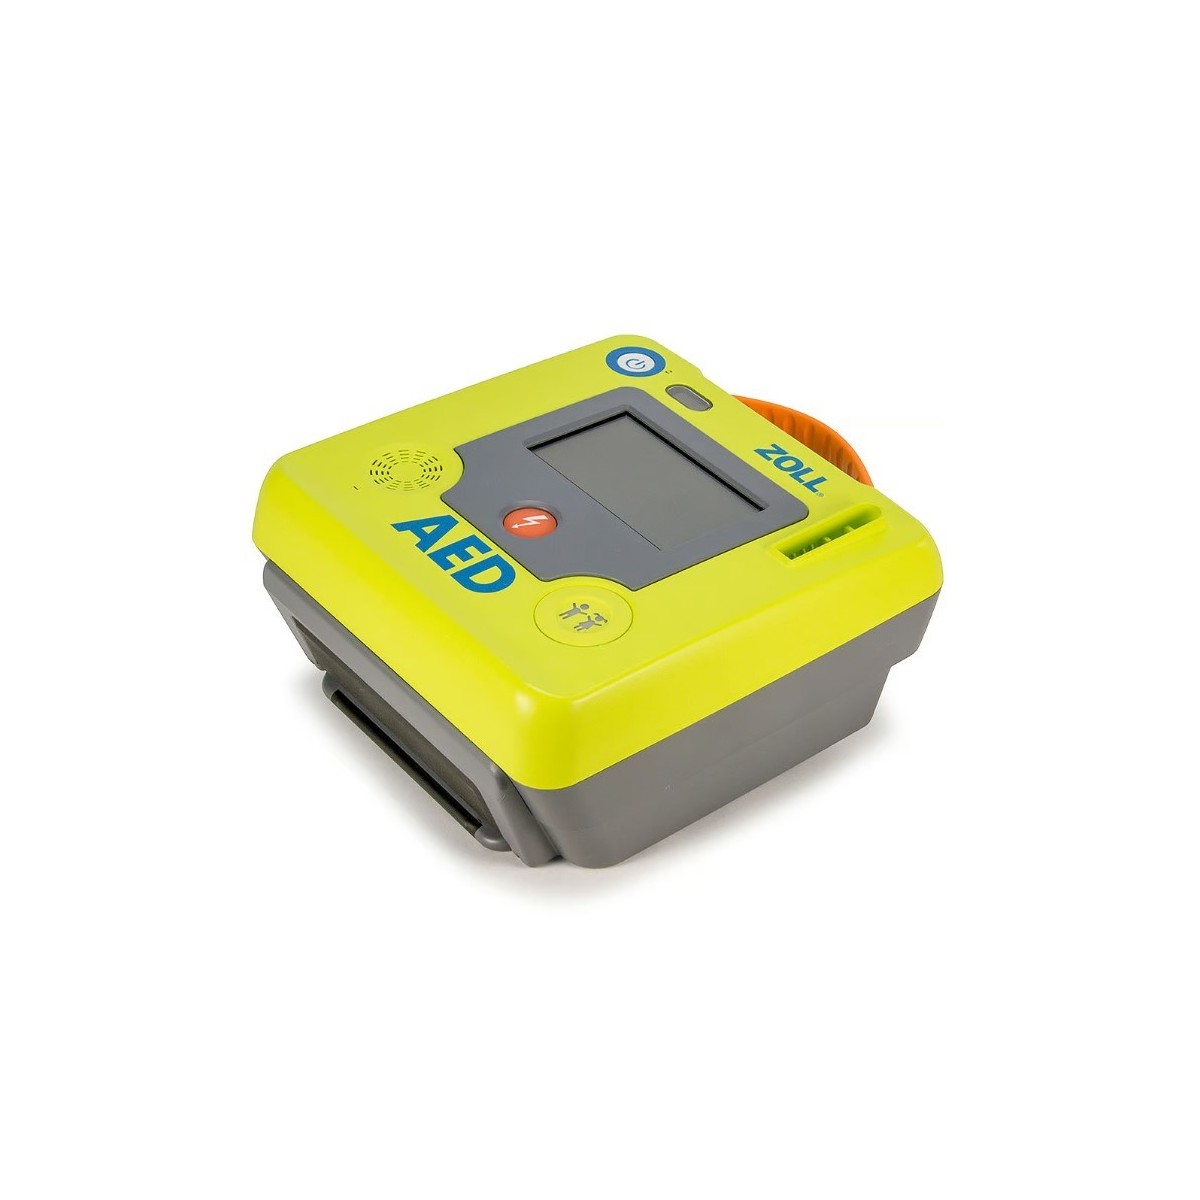 ZOLL AED 3 (Configurable)